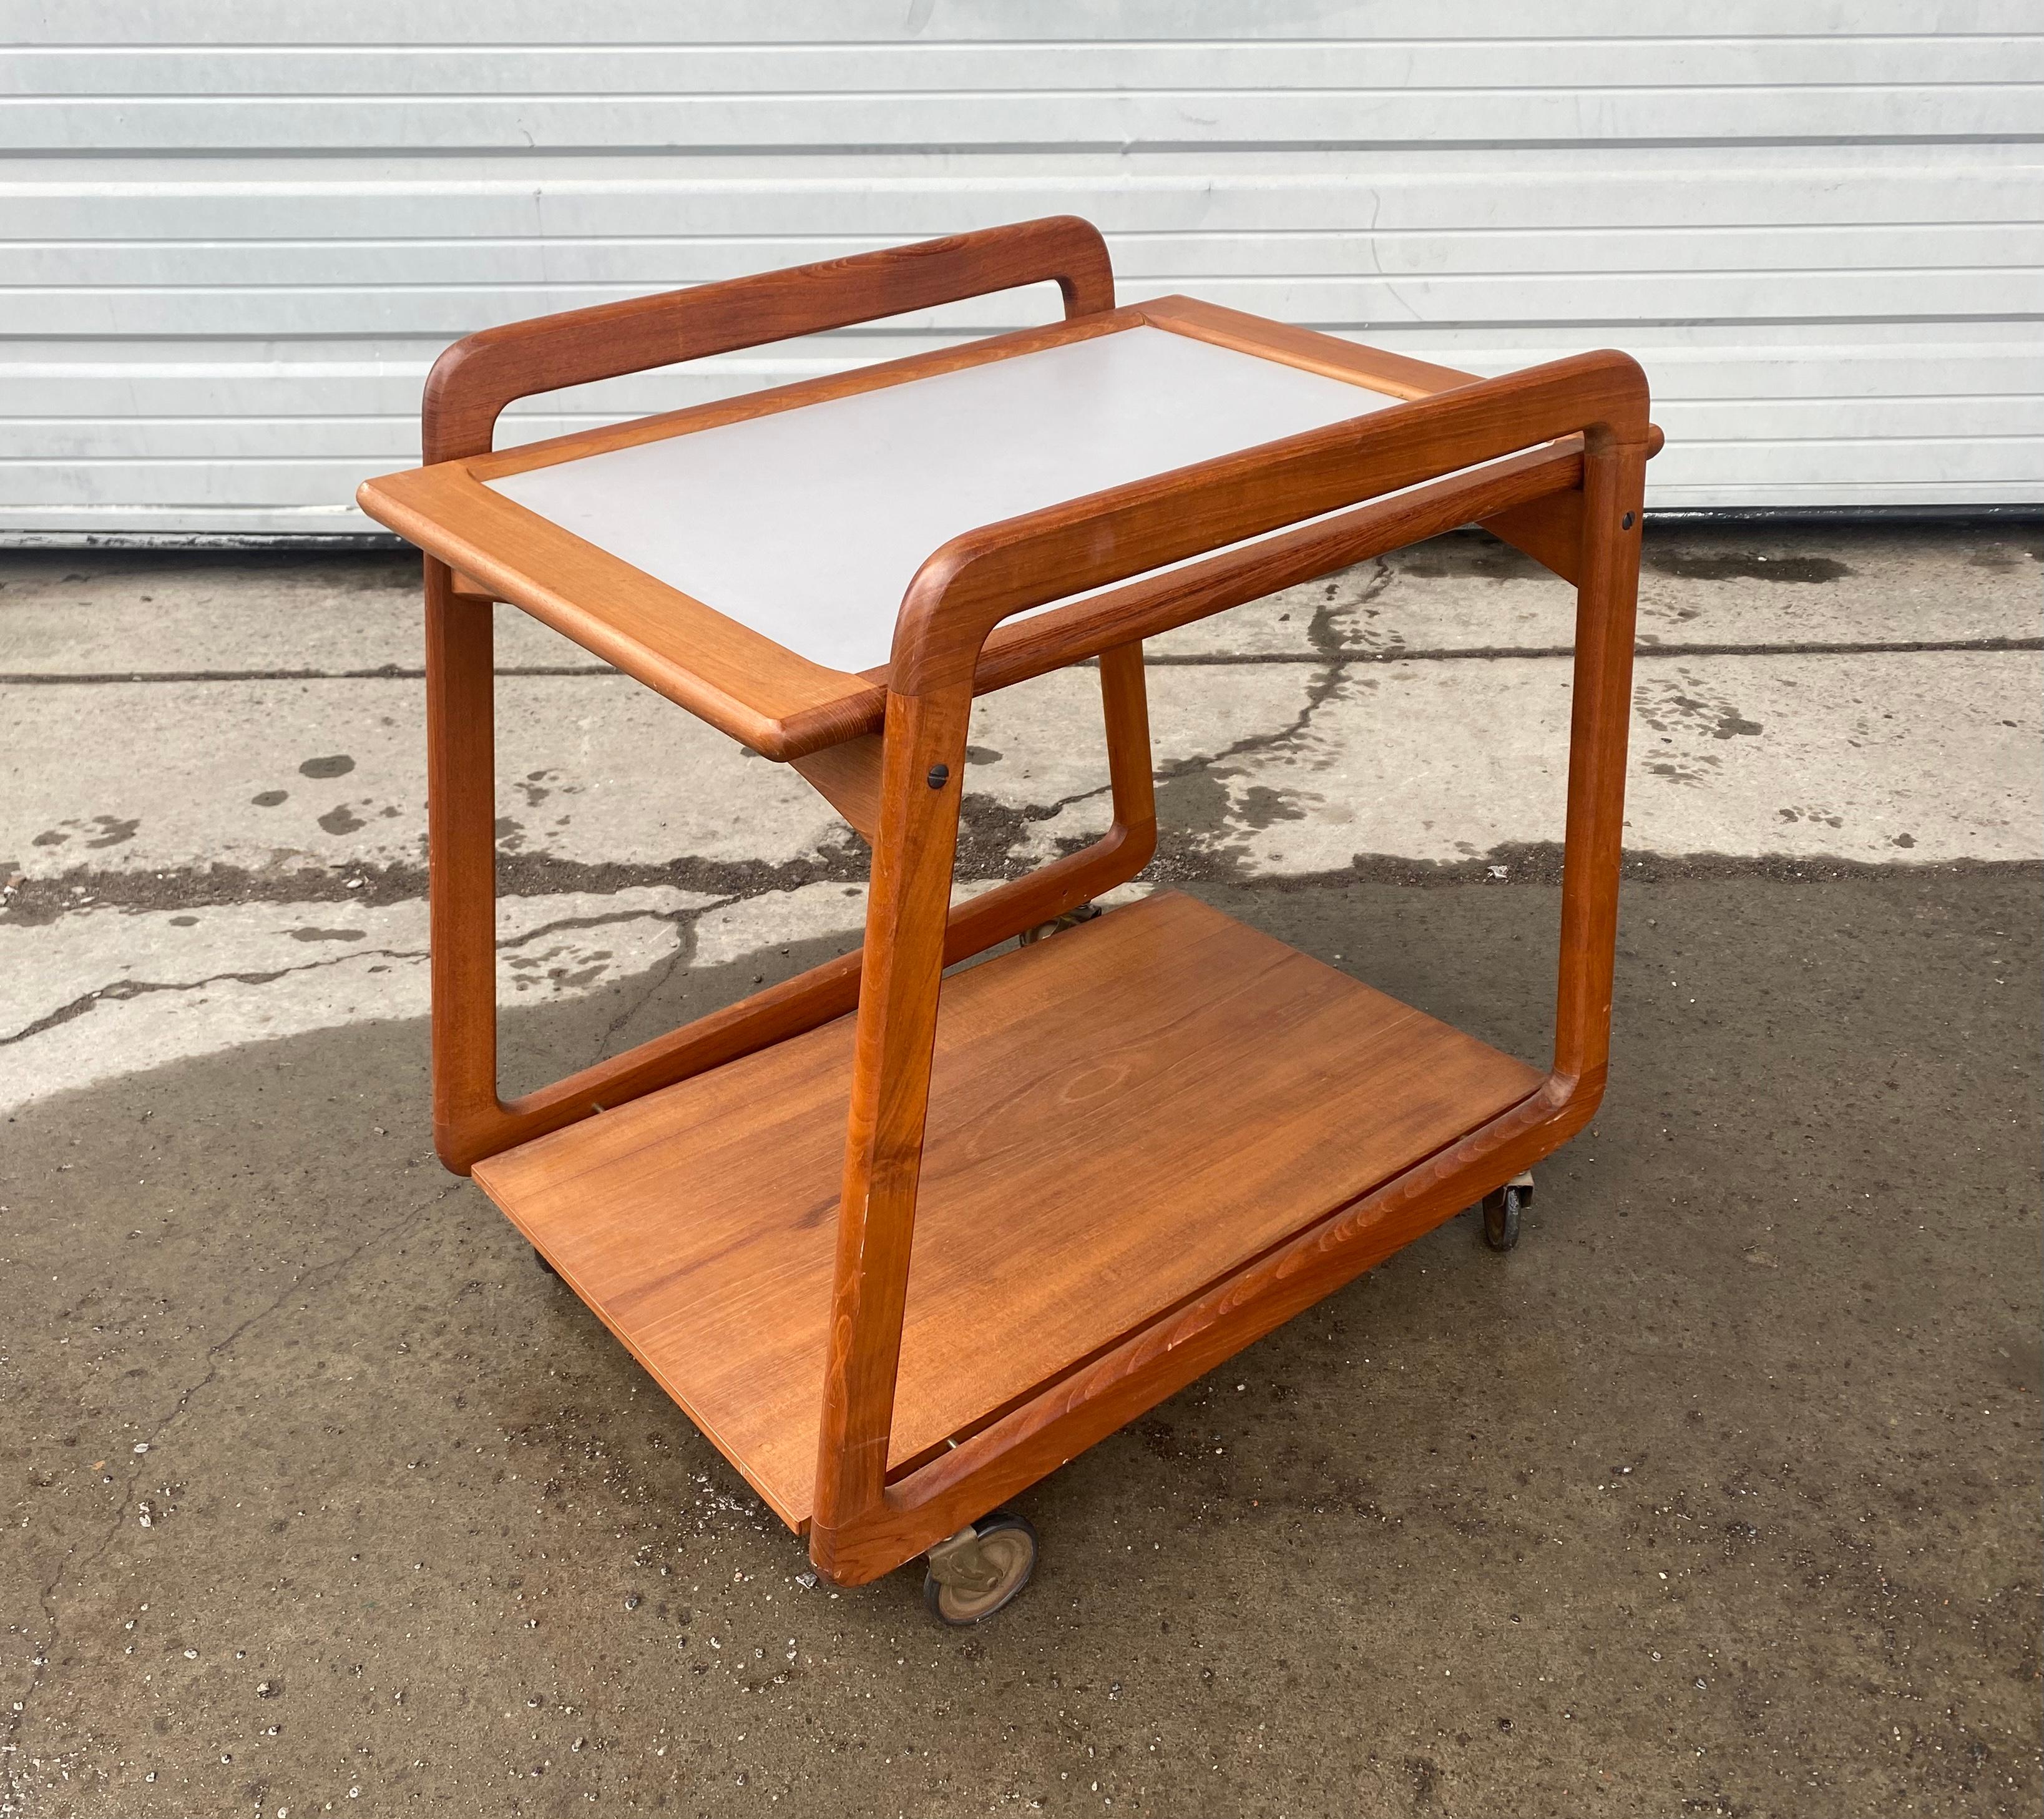 Danish modern teak bar cart or tea trolley has awesome lines! It features trapezoidal shaped sides, arced upper braces that support the two side’s tray top, a lower floating shelf held by brass pins, and Classic brass skinny 50s casters. The